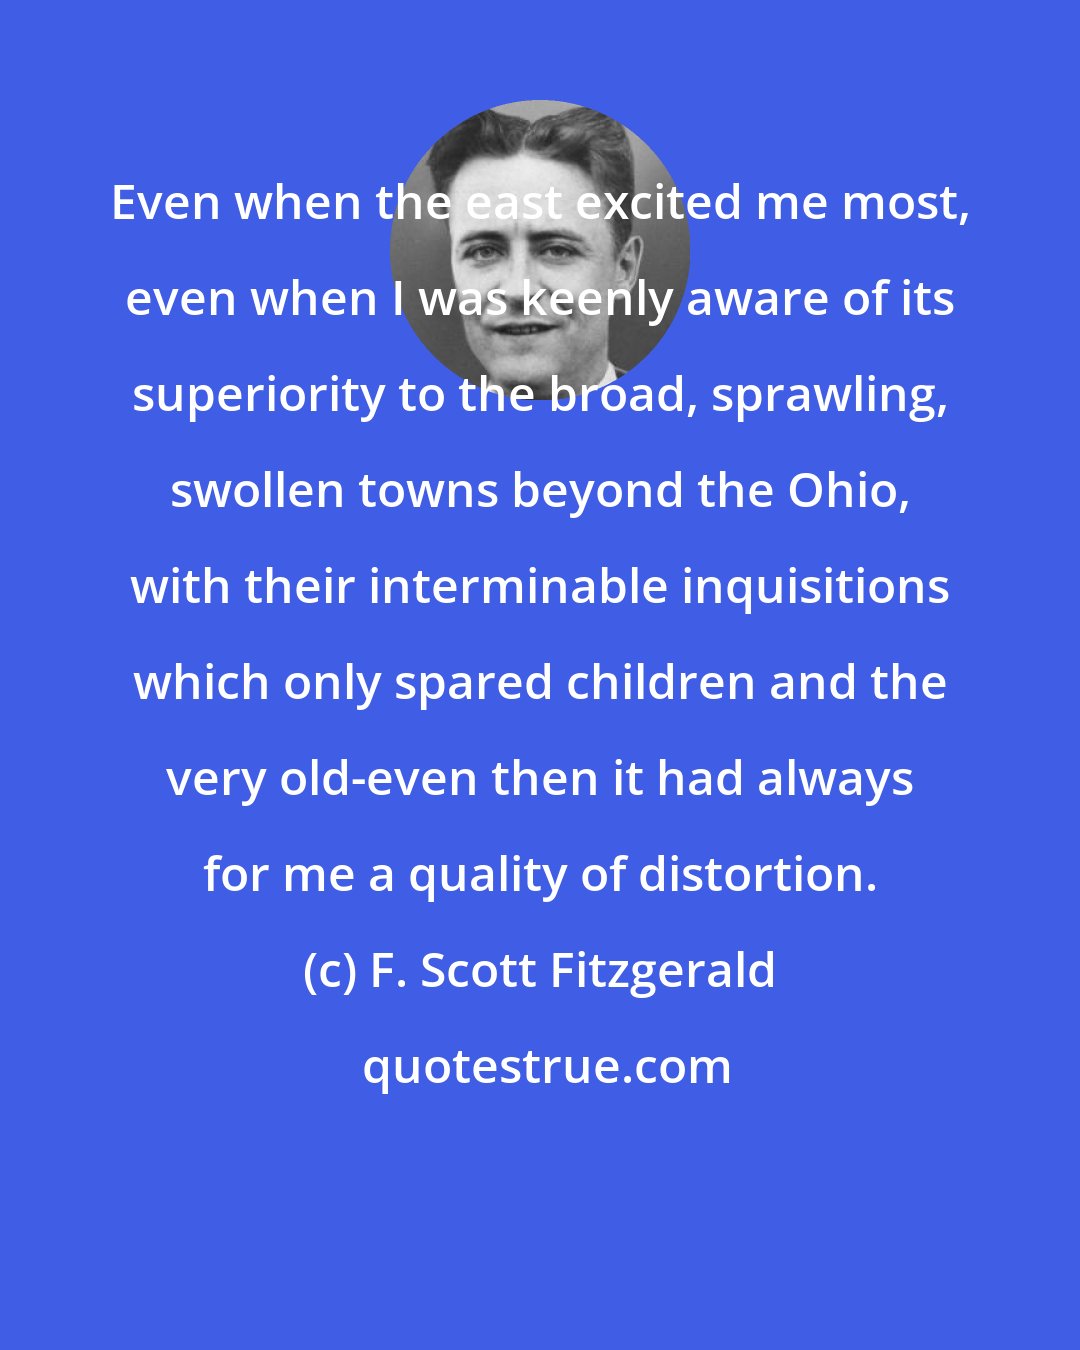 F. Scott Fitzgerald: Even when the east excited me most, even when I was keenly aware of its superiority to the broad, sprawling, swollen towns beyond the Ohio, with their interminable inquisitions which only spared children and the very old-even then it had always for me a quality of distortion.